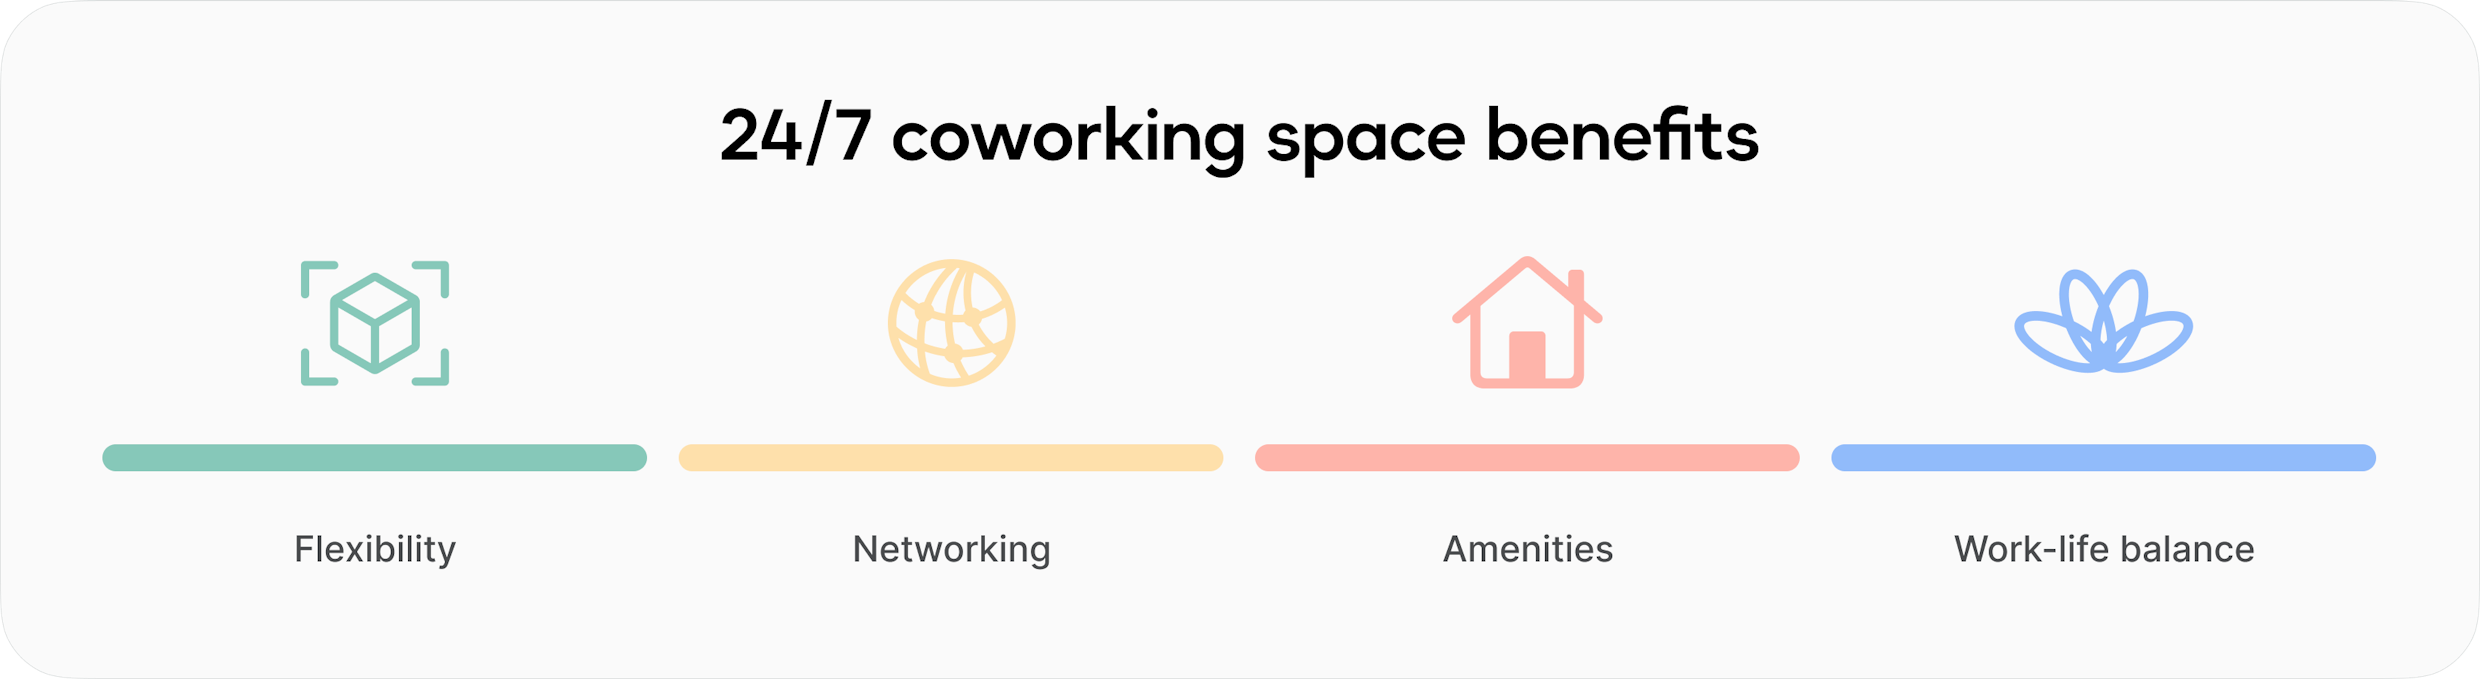 Benefits of 24/7 coworking spaces